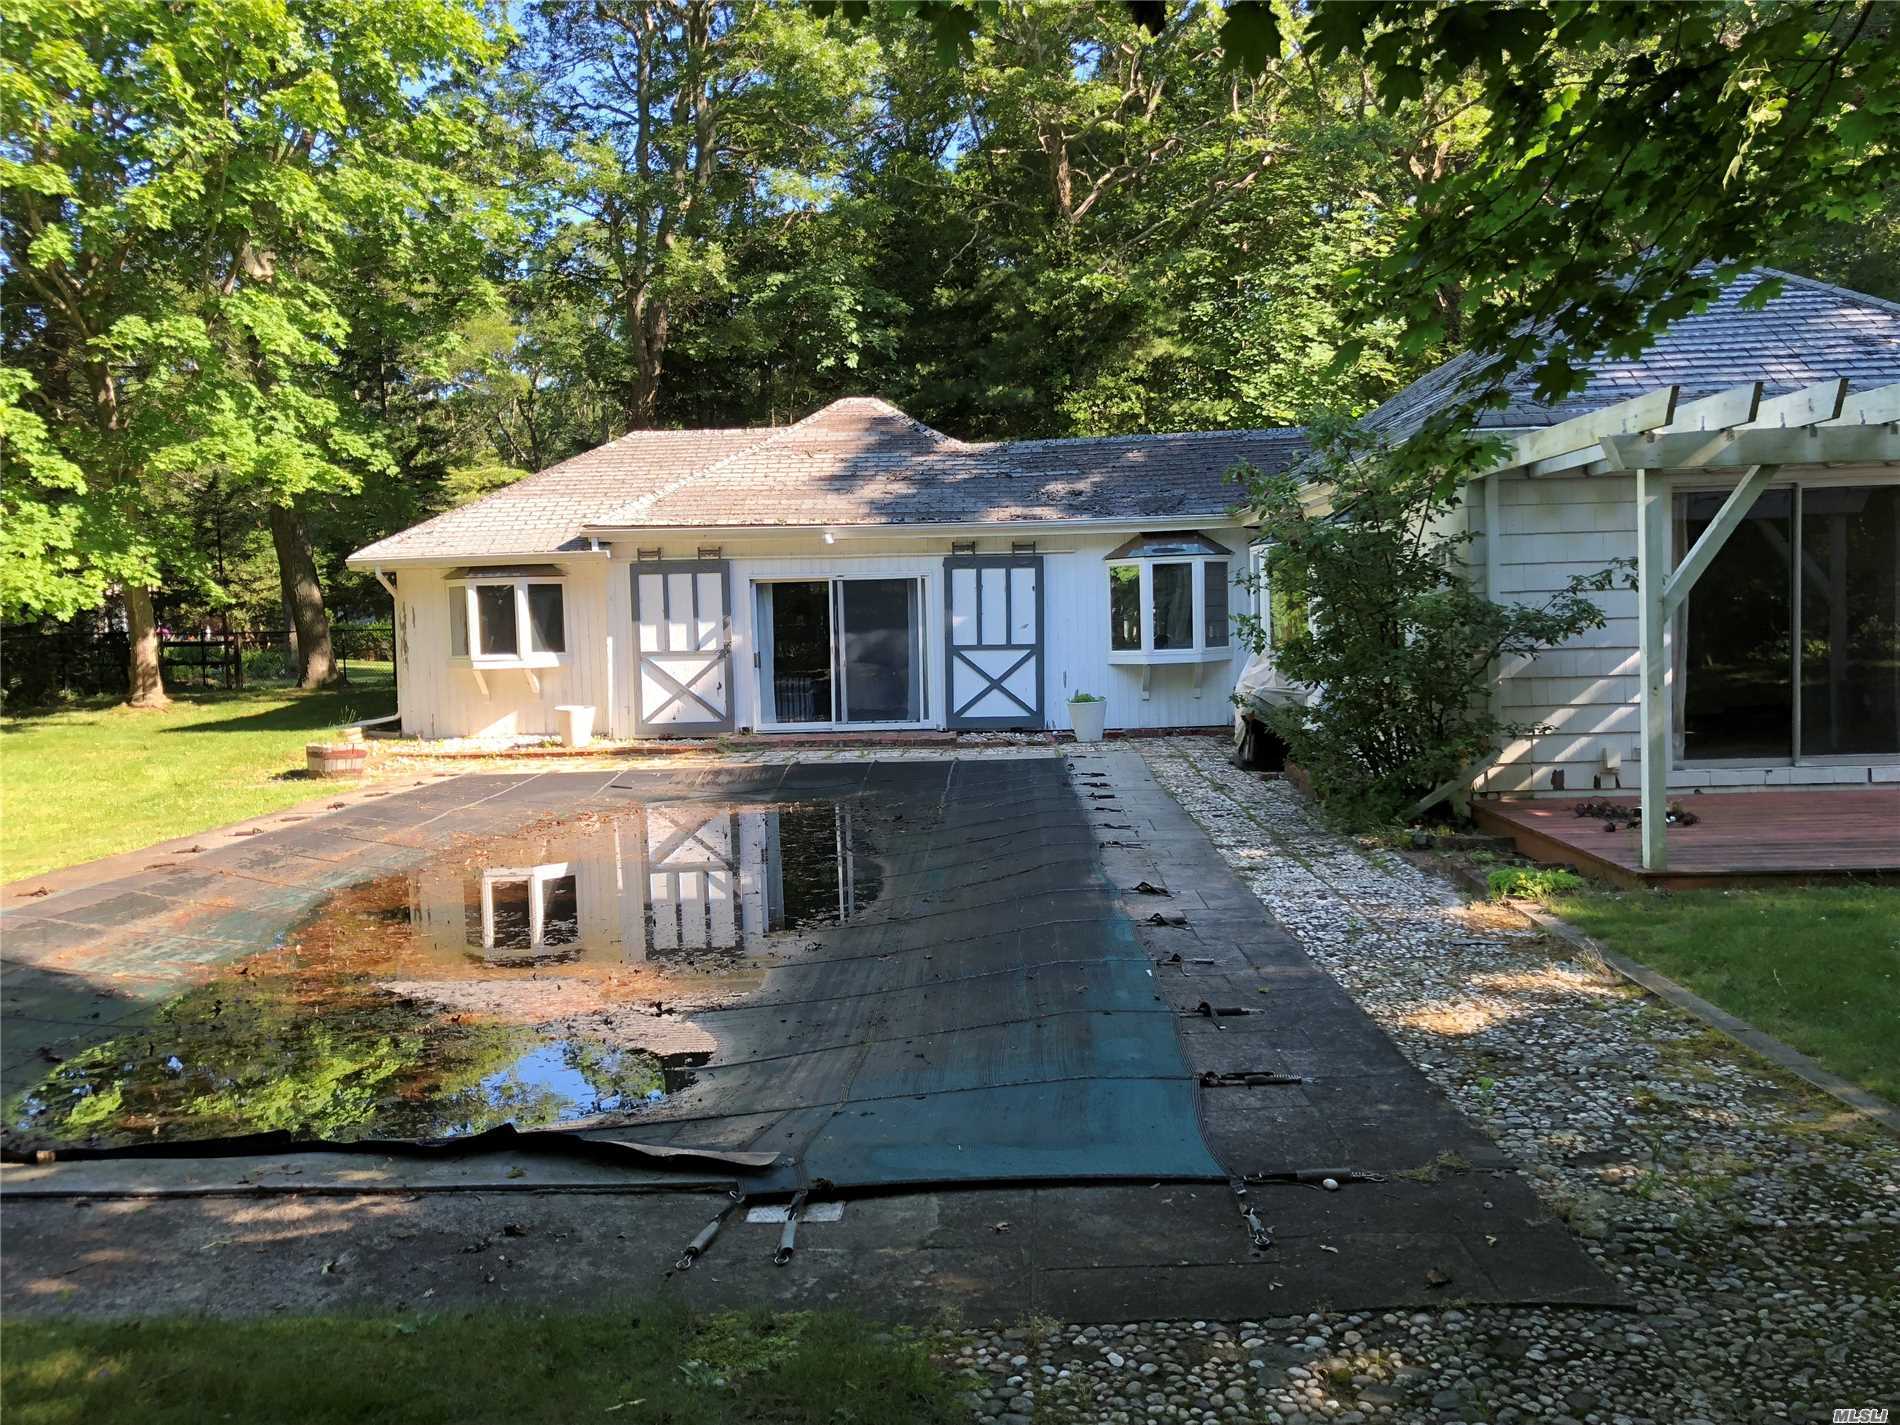 This Photo Is The Pool House Which Has 1400 Sq Ft. The Main House Is The Second Photo Which Has 2400.The Pool Is 20 X 40. This Property Is 0.85 Of An Acre In A Beautiful Secluded Location Near Np Private Beaches.. The Main House Is In Need Of Structural Repairs & Renovations. The Pool House Is Also In Need Of Renovations. We Have C Of O&rsquo;s For Both Structures . This Is The Least Expensive House For Sale On Np. This Is A Great Opportunity To Customize These 2 Structures To Suit Your Needs.